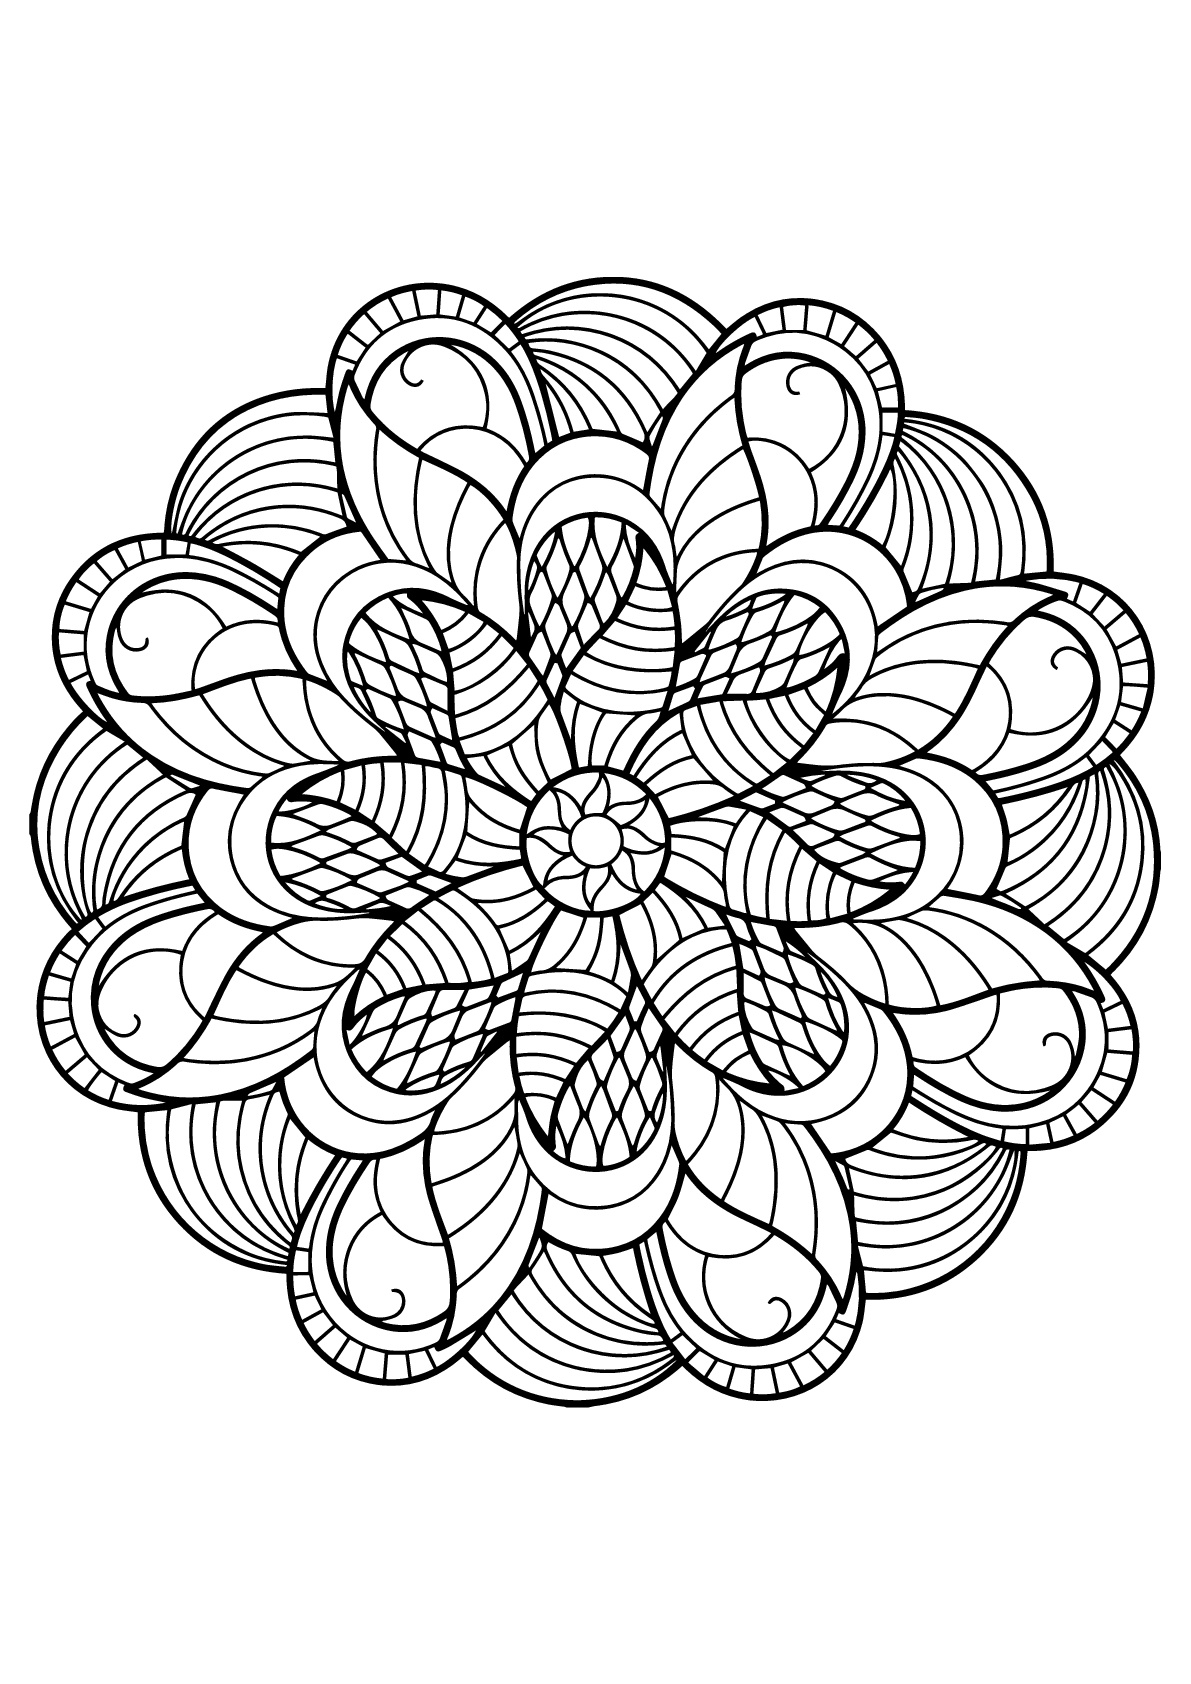 Download Mandala From Free Coloring Books For Adults 6 Mandalas Adult Coloring Pages